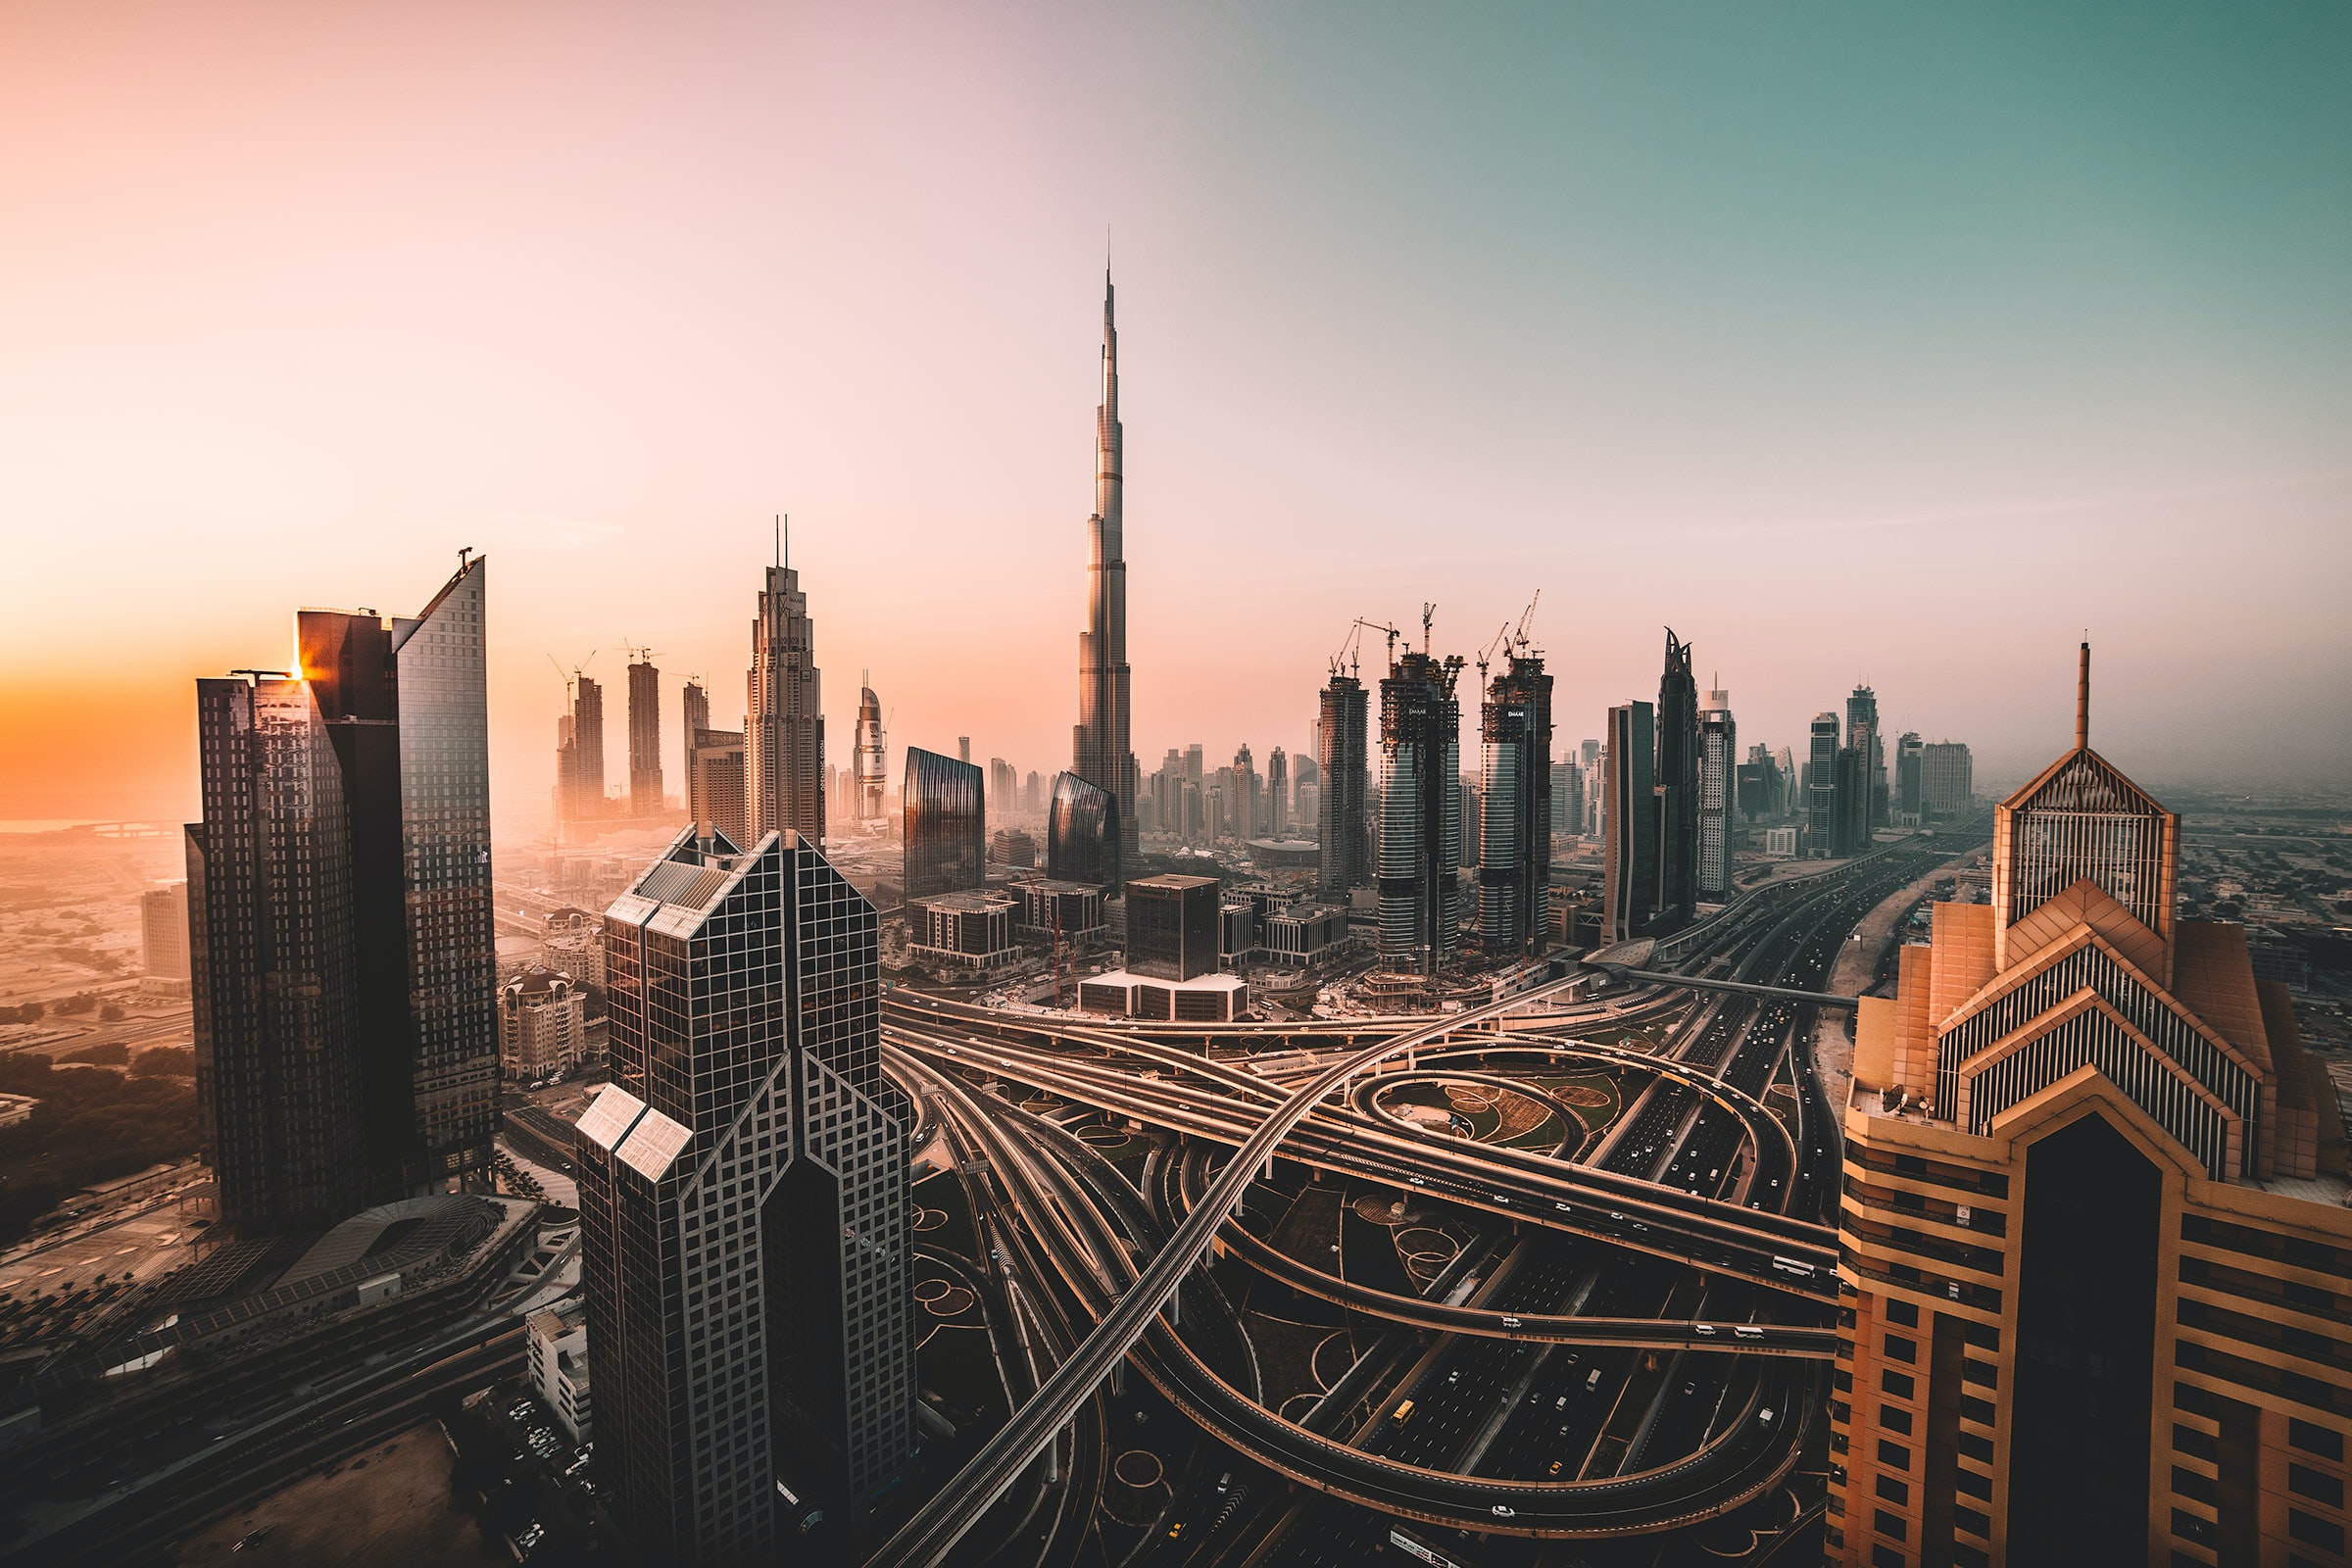 Why You Should Put Dubai at the Top of Your Travel List - visit, travel, traditional culture, Dubai, desert, culinary delights, adrenaline rush